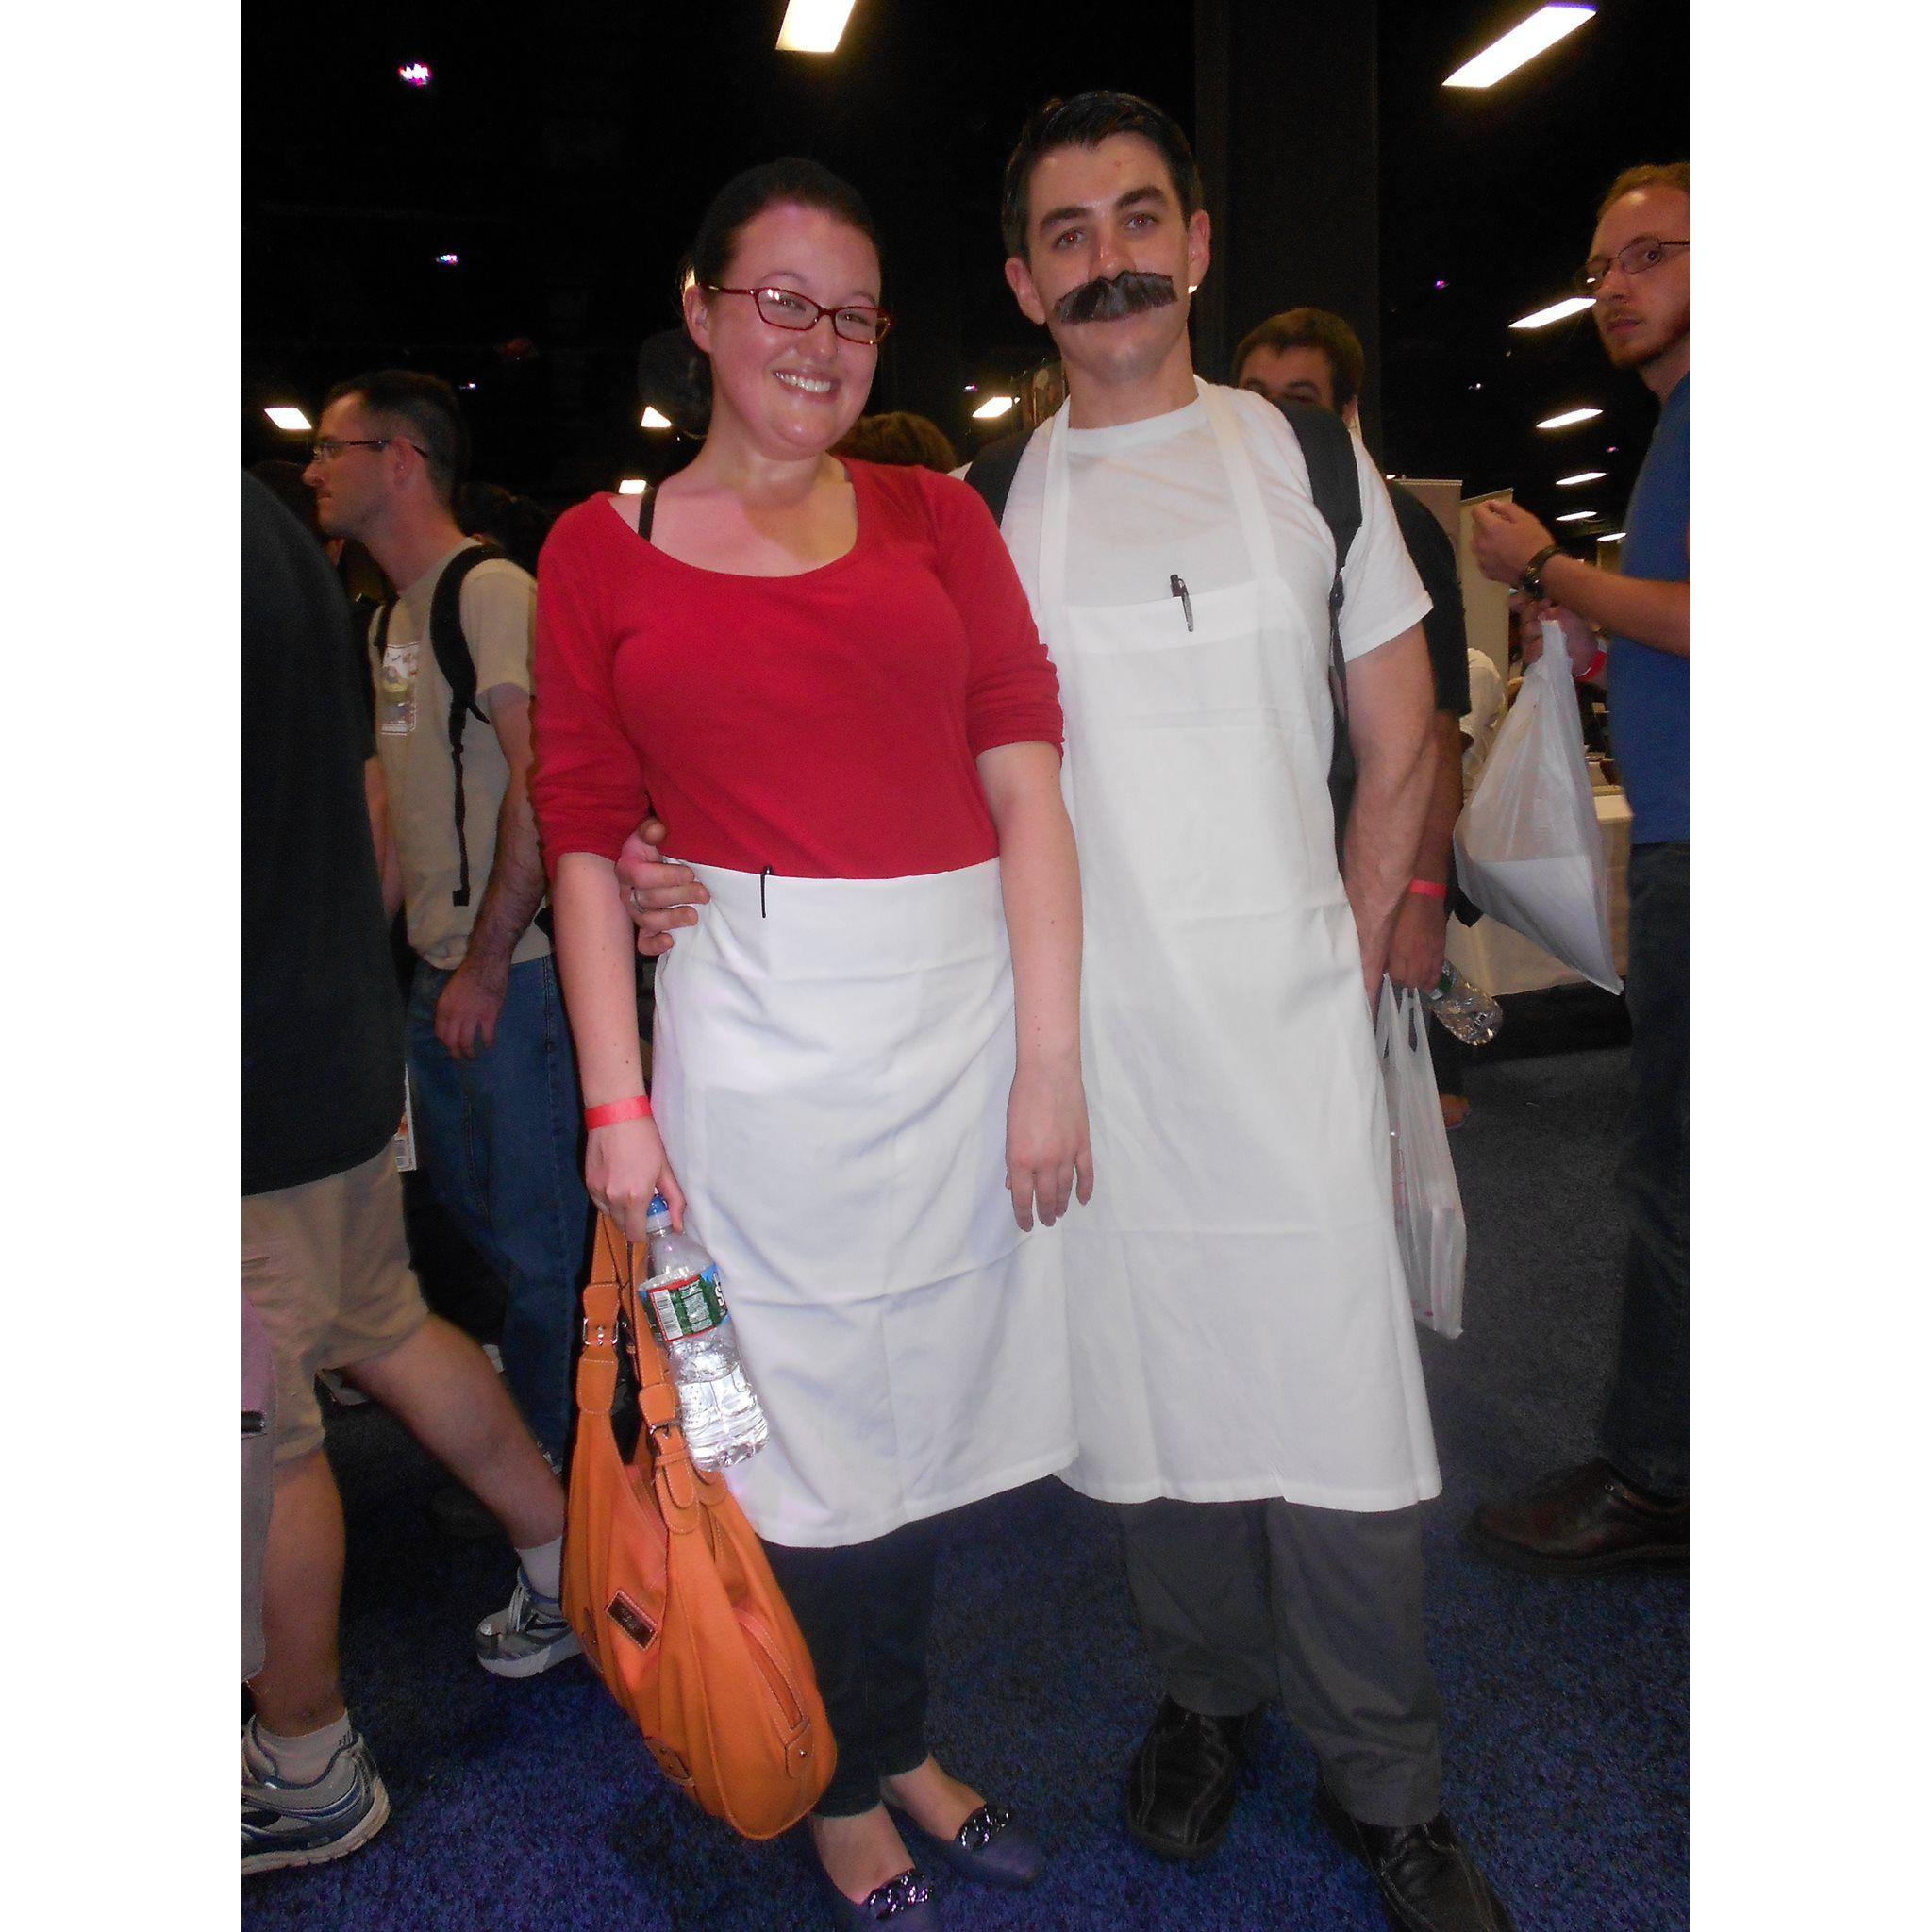 Their first Comic Con together as Bob and Linda Belcher. 2013